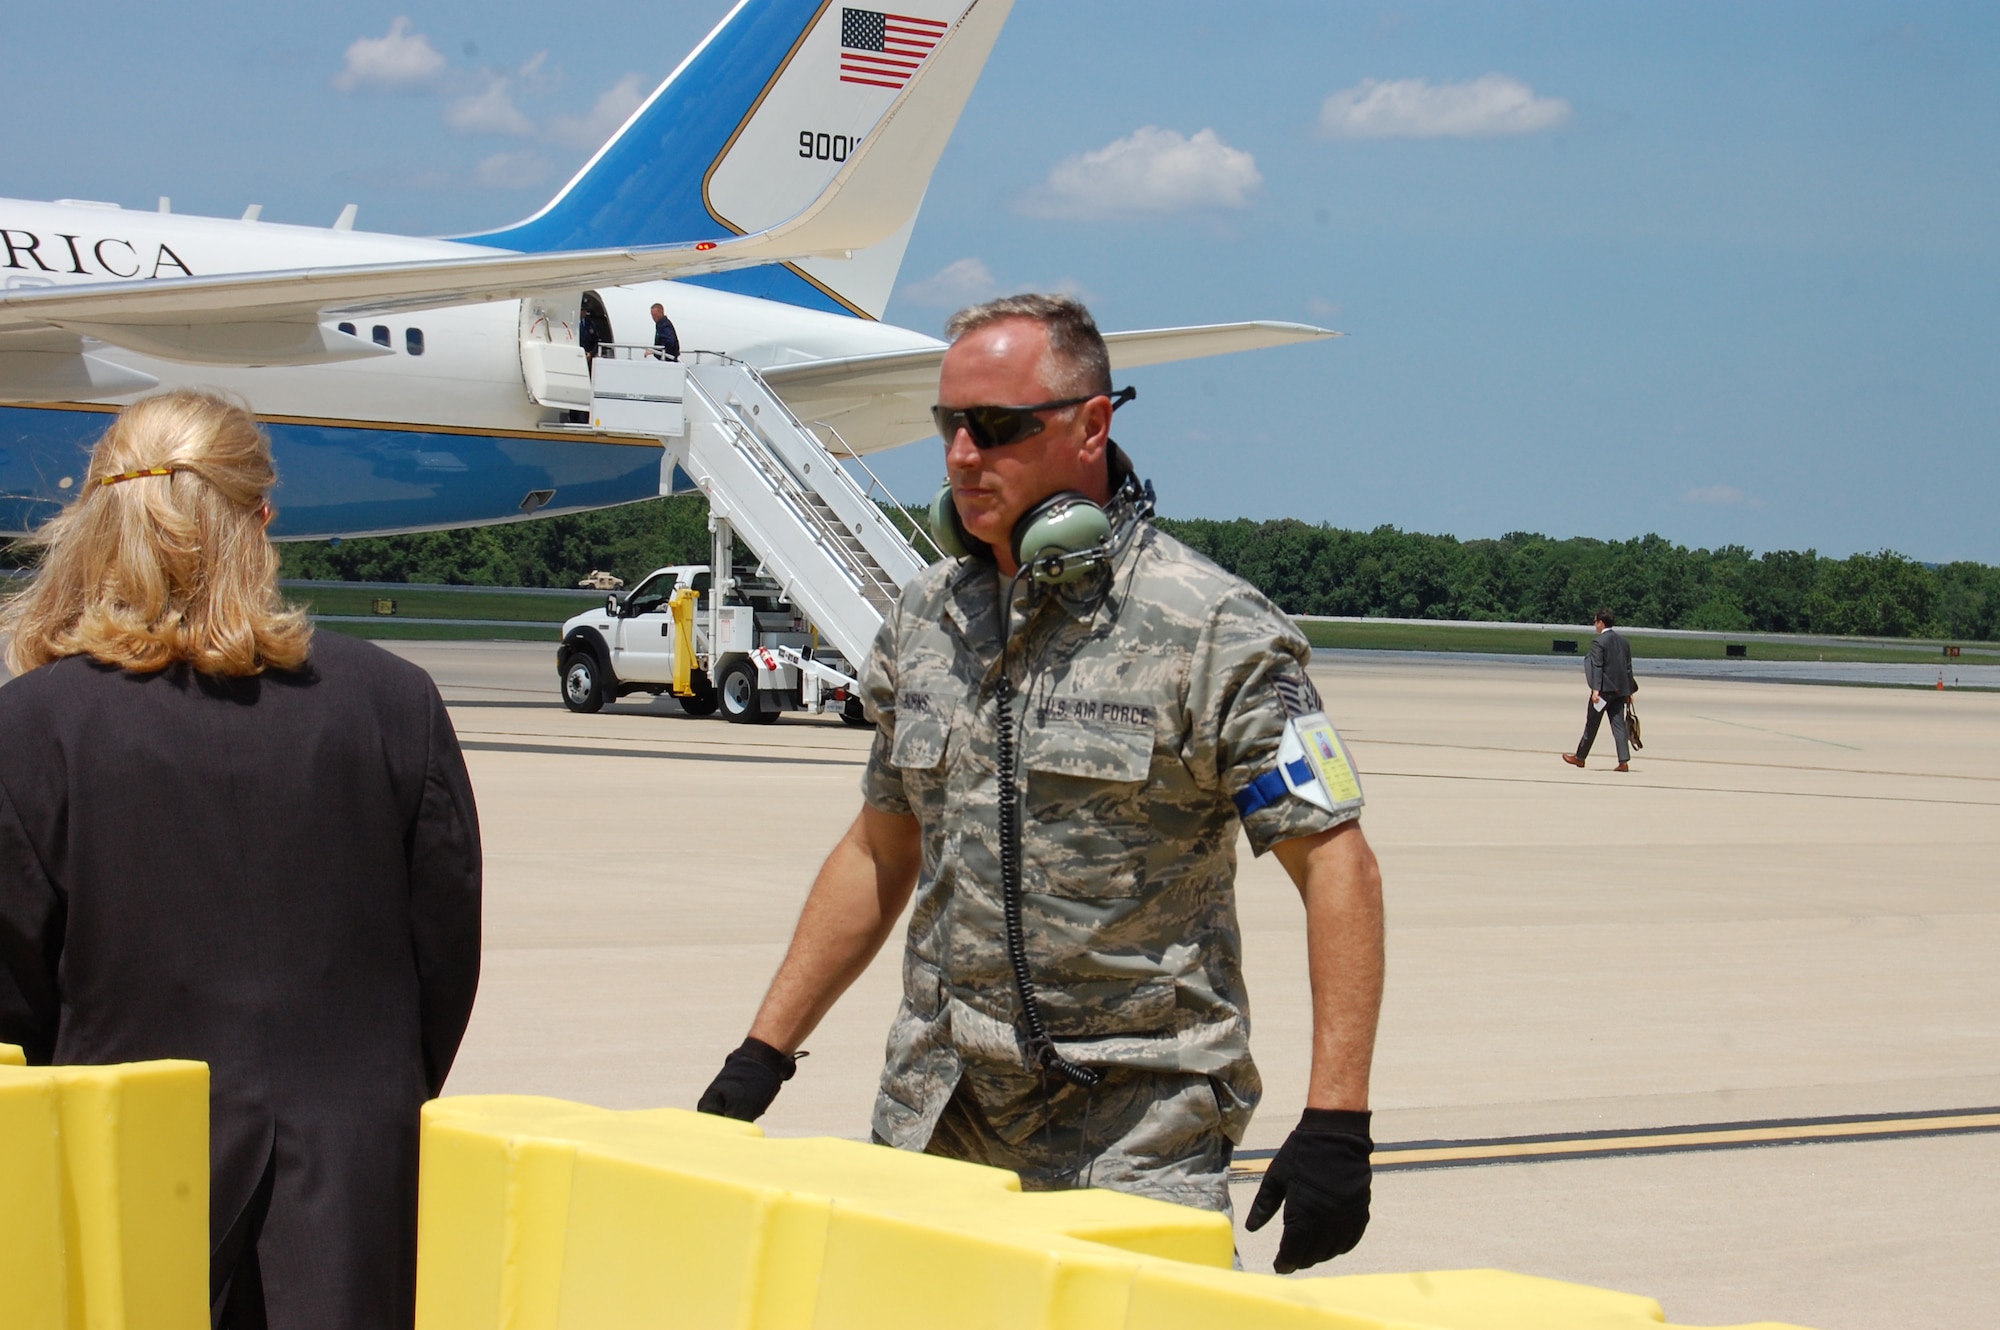 Technical Sgt. Jim Burns, crew chief, 166th Aircraft Maintenance Squadron, placed chocks under the wheels of Air Force One after U.S. President Barack Obama arrives at the New Castle Air National Guard Base, Del. on July 17, 2014. The president came to the home of the 166th Airlift Wing, Delaware Air National Guard en route to the Port of Wilmington, Delaware to announce a new initiative to increase private sector investment in our nation’s infrastructure. (U.S. Air National Guard photo by Tech. Sgt. Benjamin Matwey)